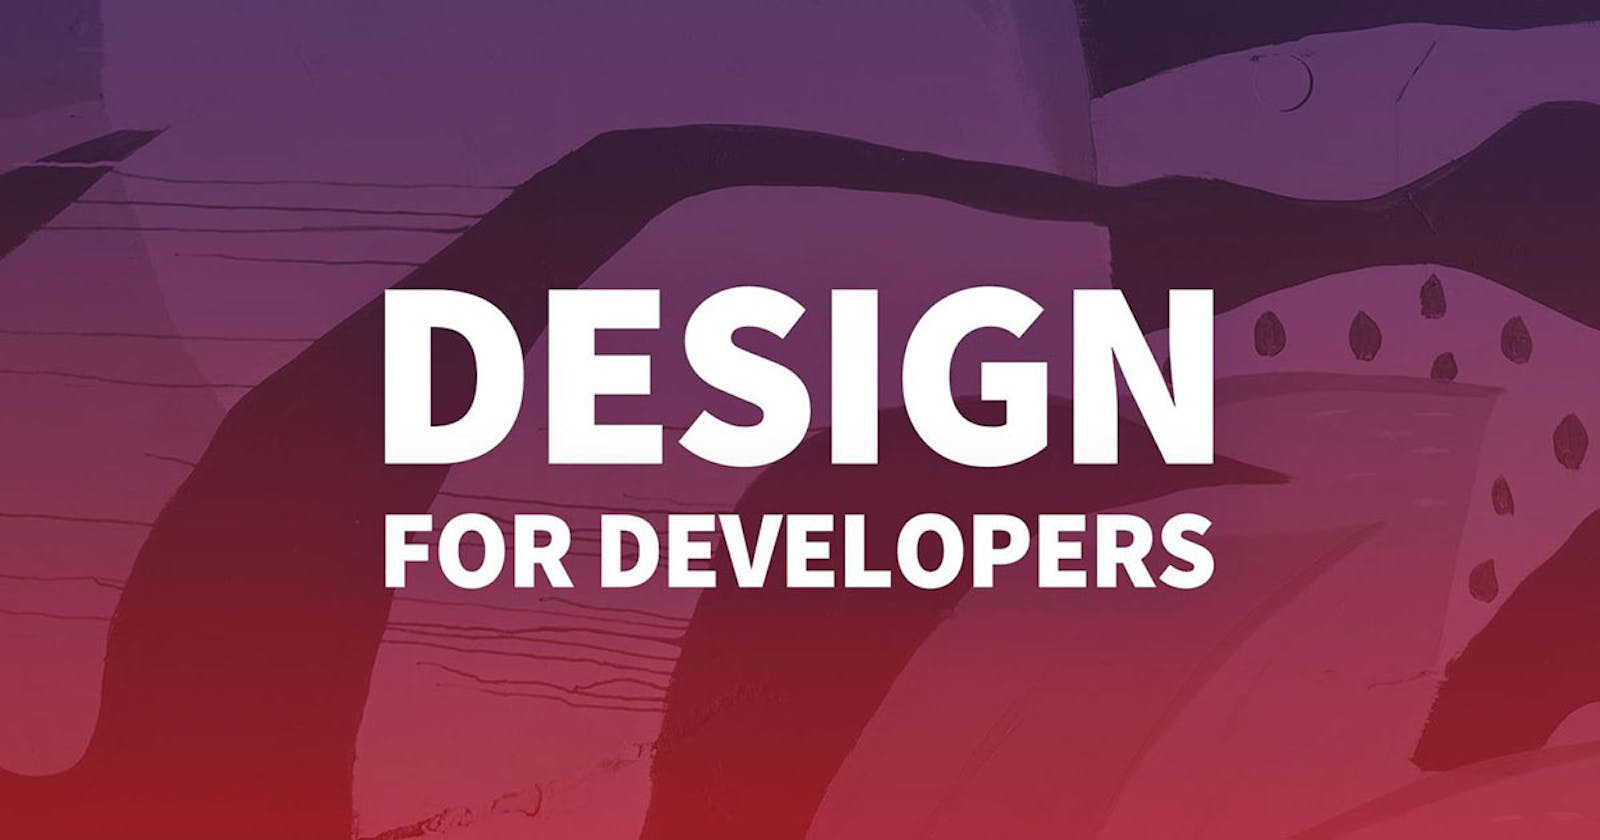 How is Design Important as a Developer and What Can You Do to Level Up?